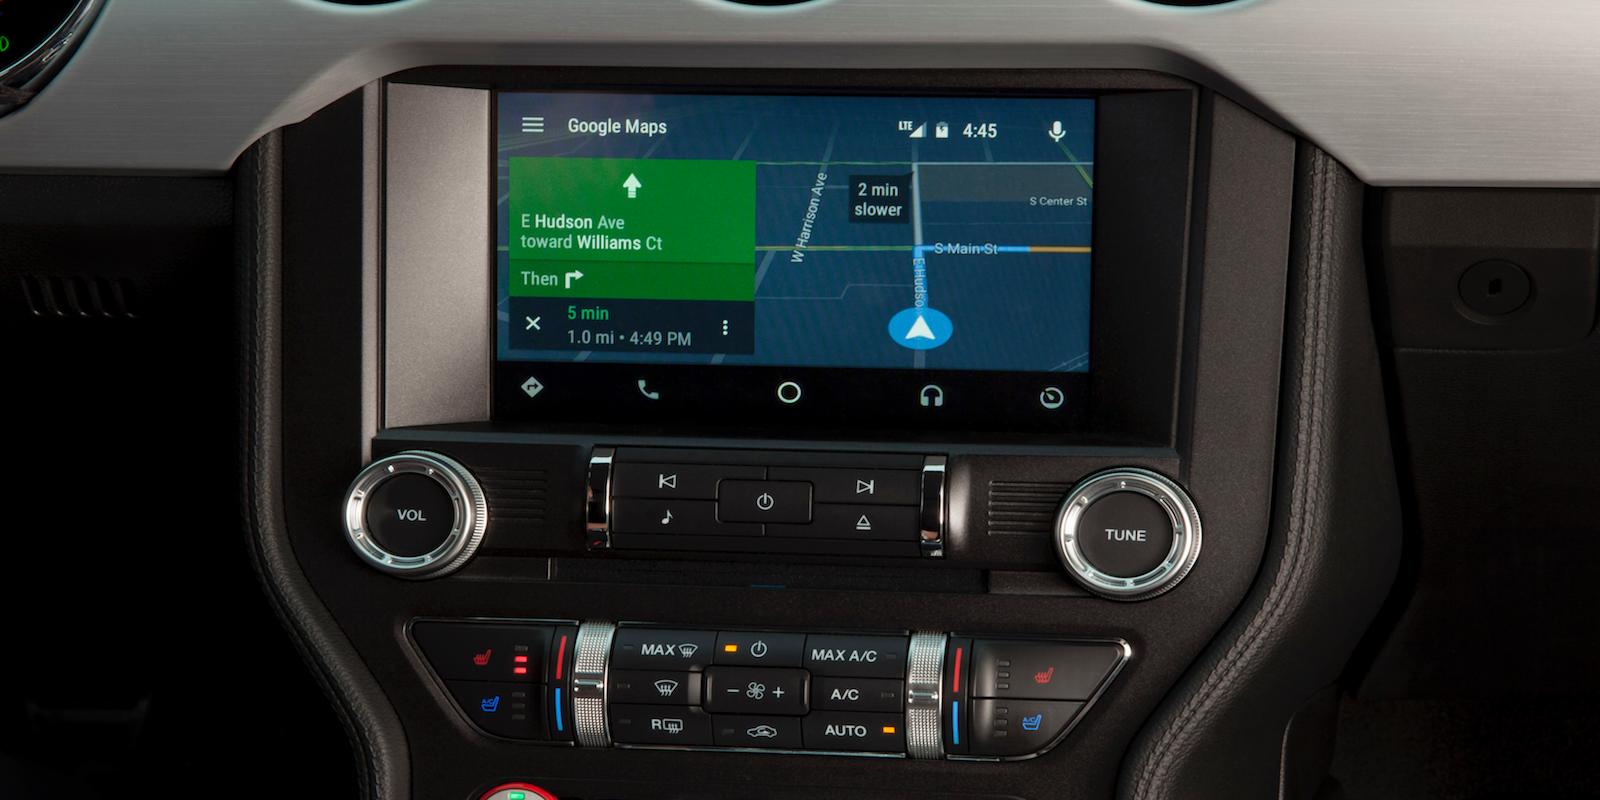 Ford Sync 3 Software Update Download - signsclever